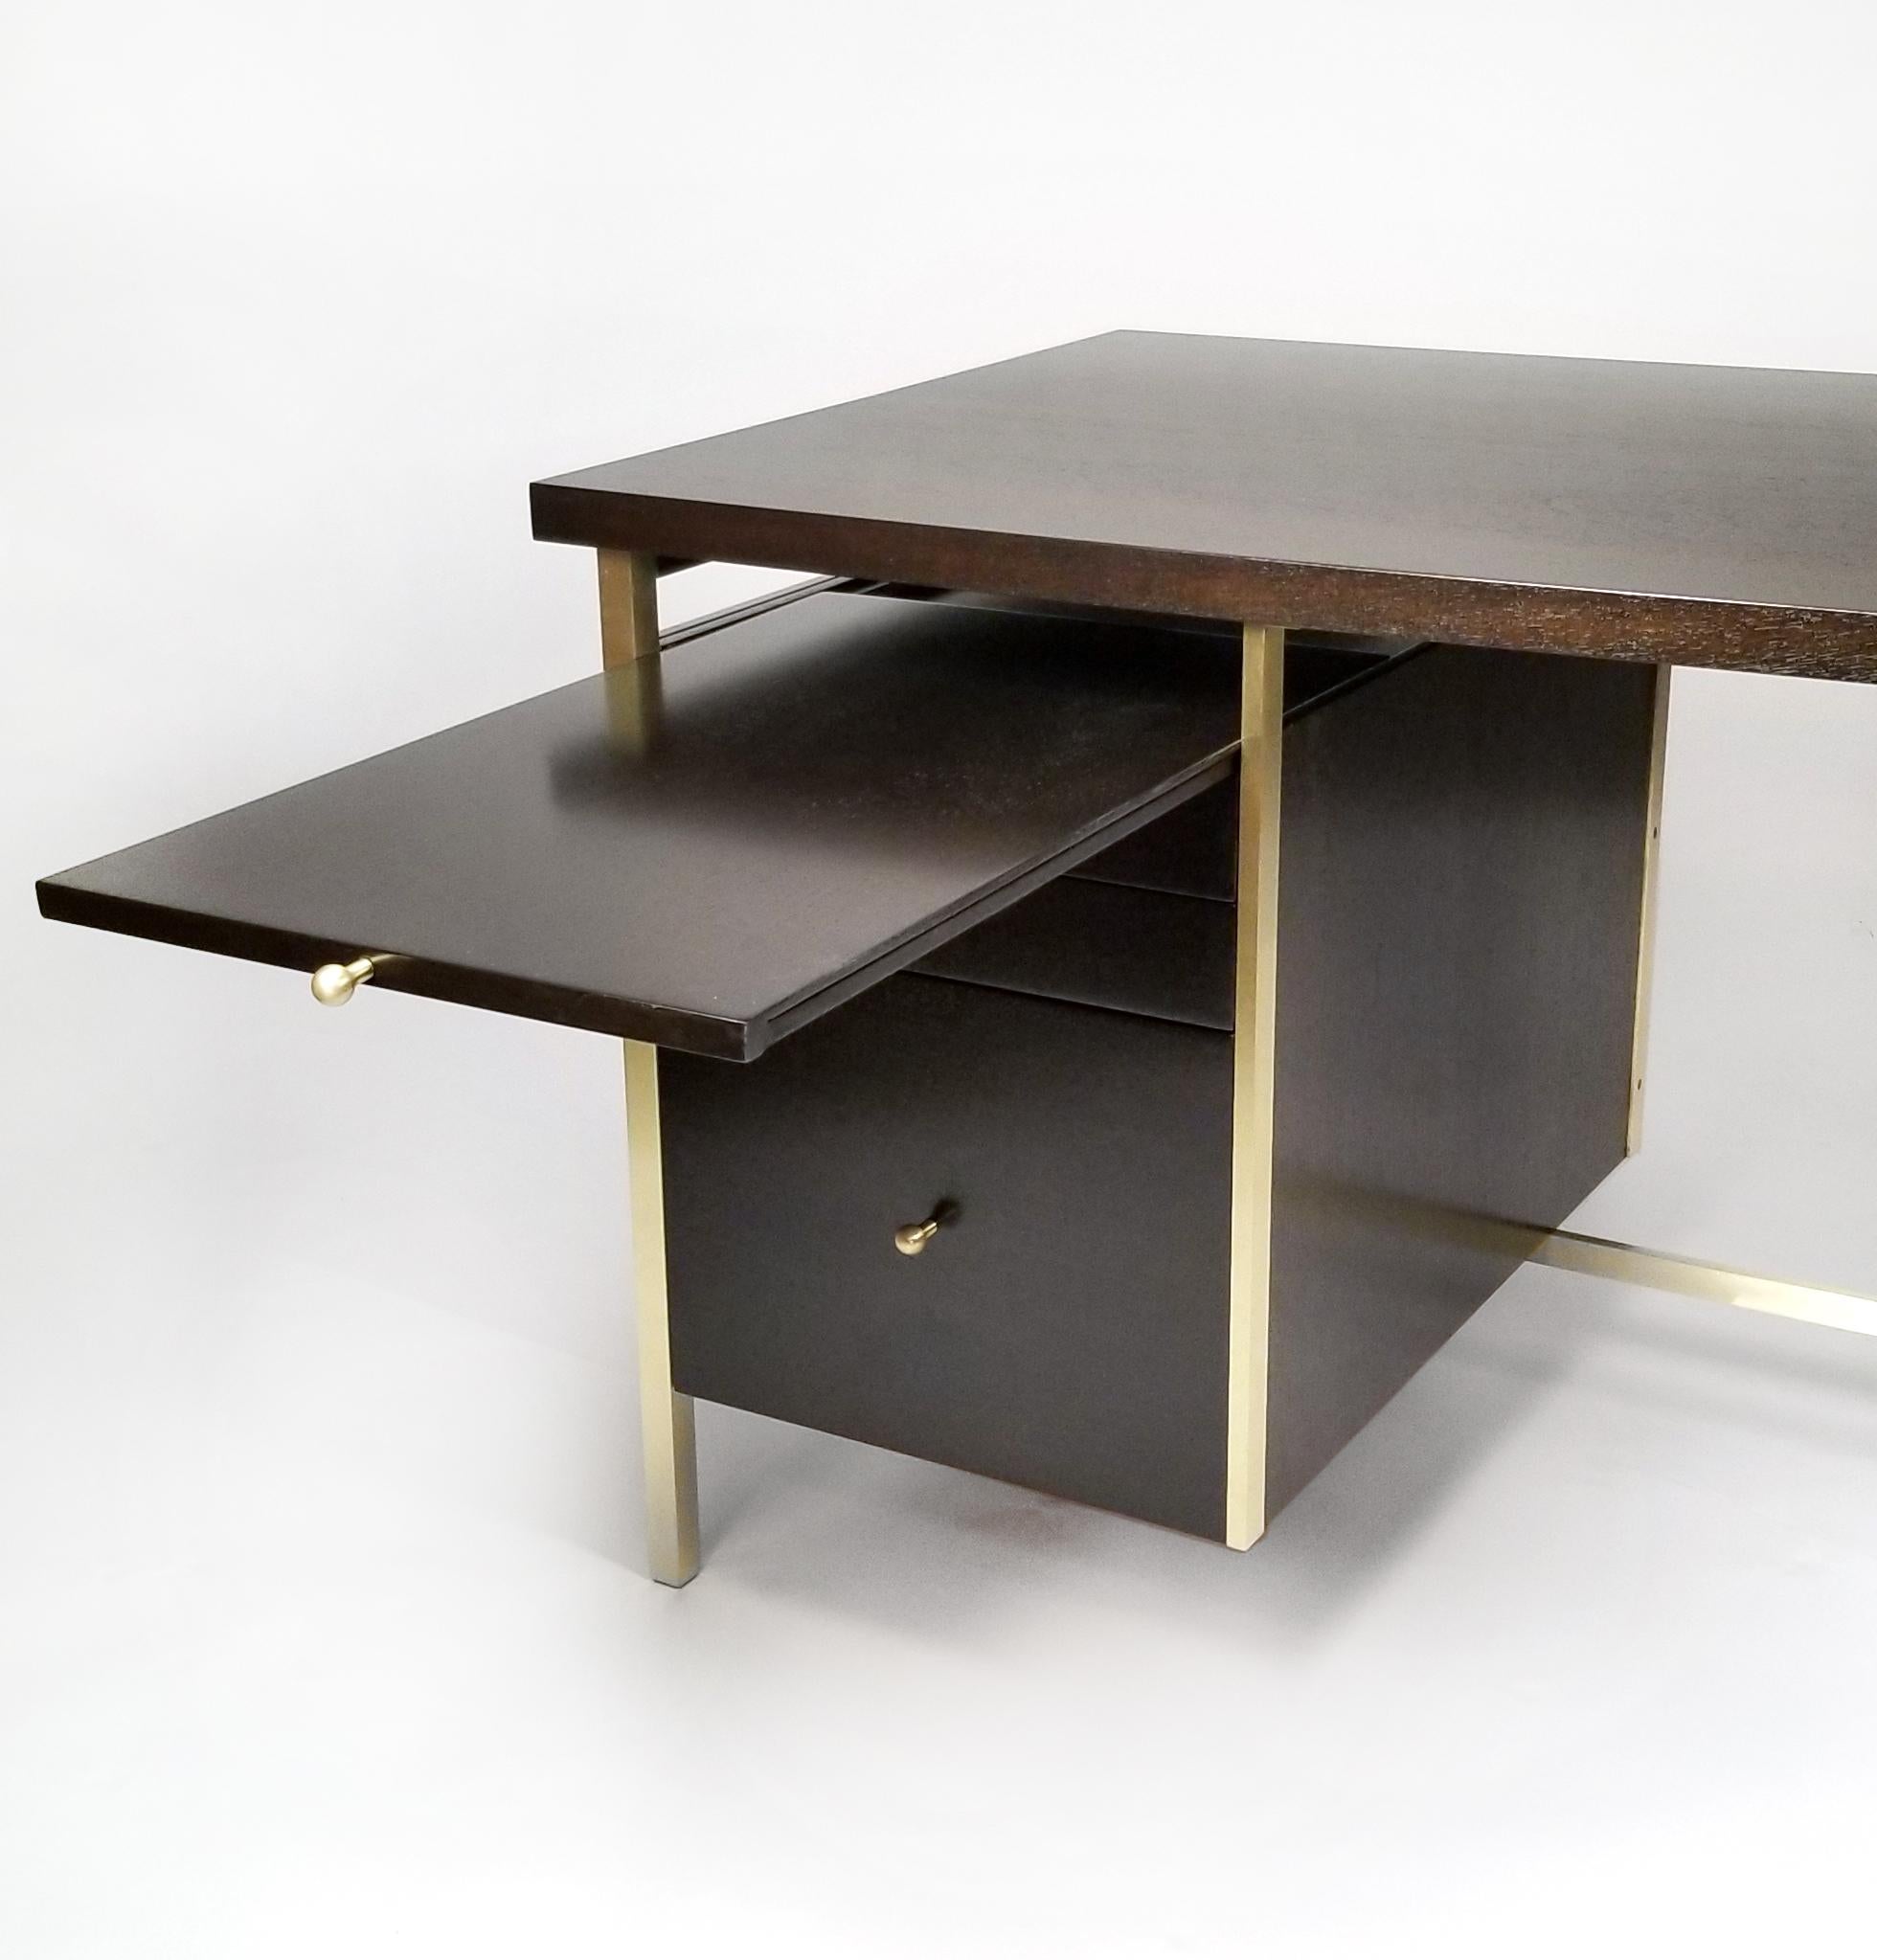 American Paul McCobb Brass & Mahogany Desk for the Connoisseur Collection H. Sacks & Sons